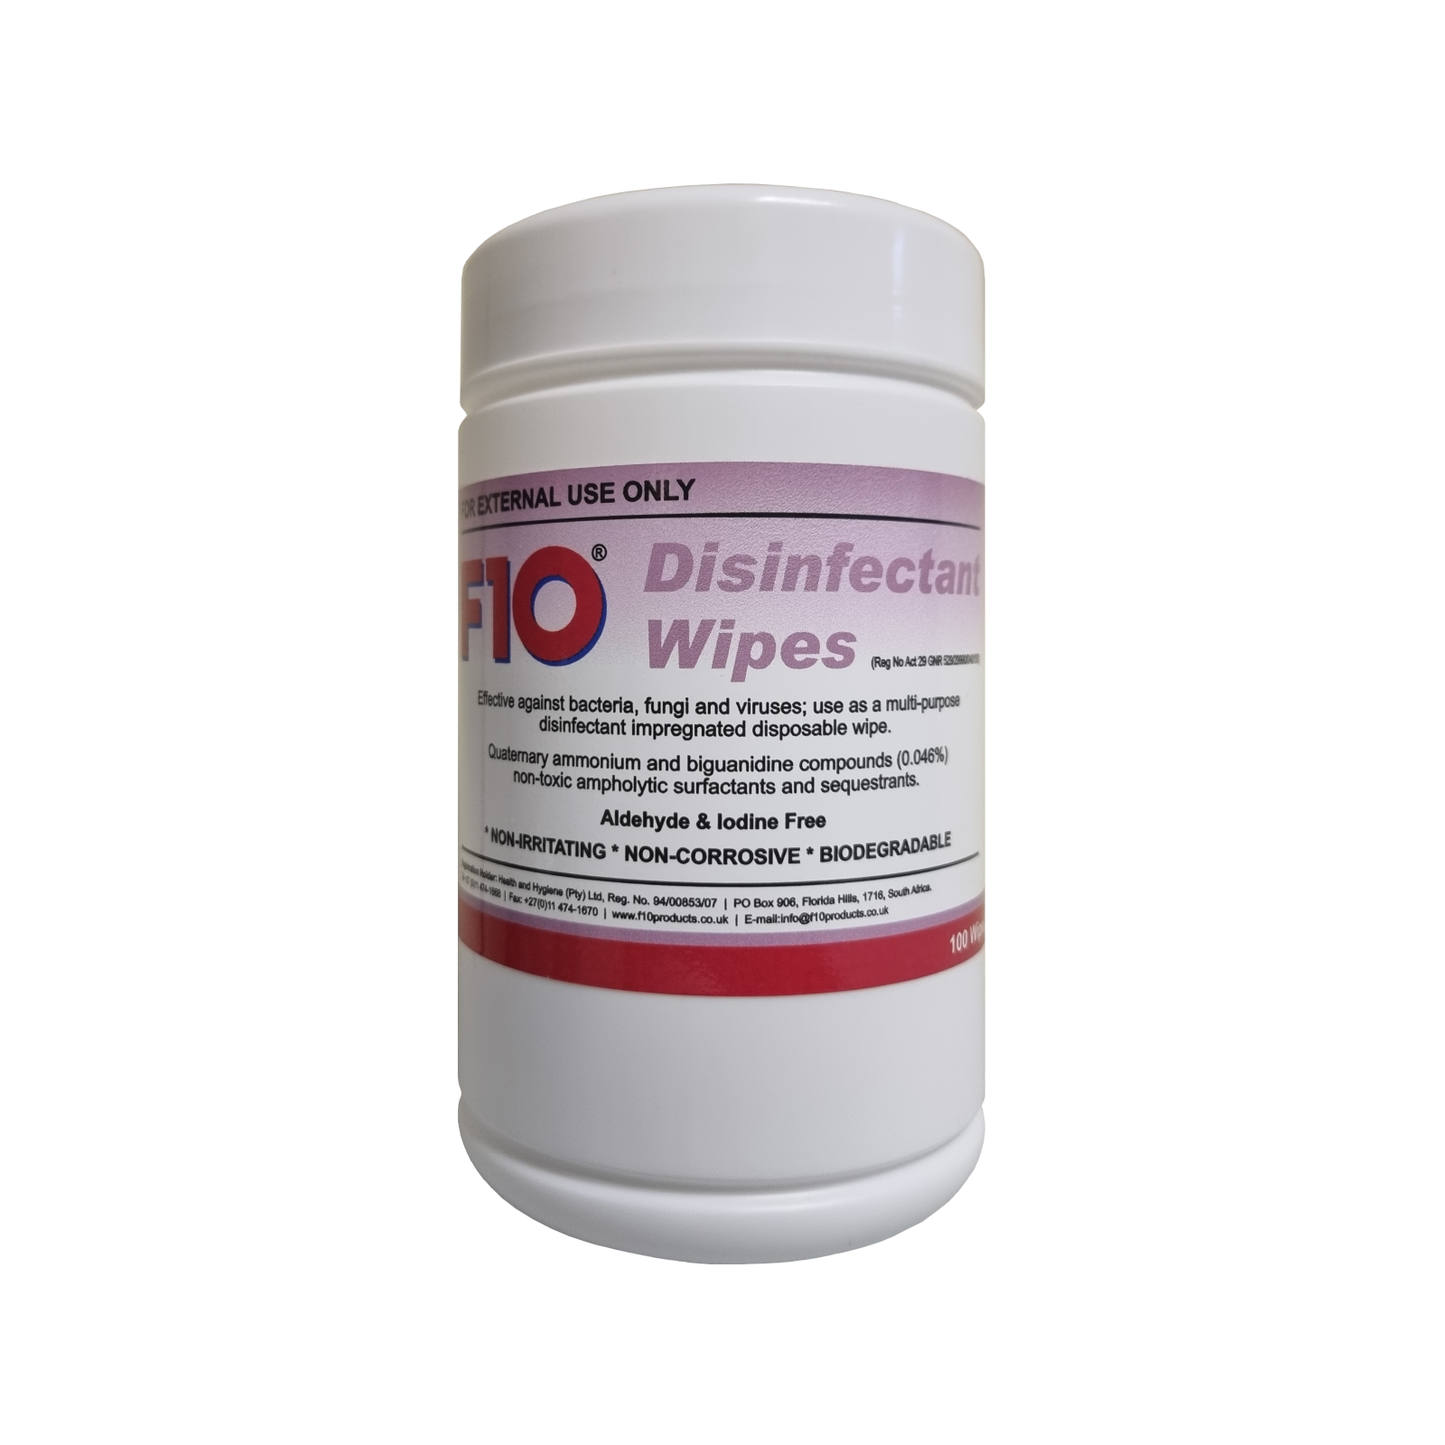 A tub of F10 Disinfectant Wipes